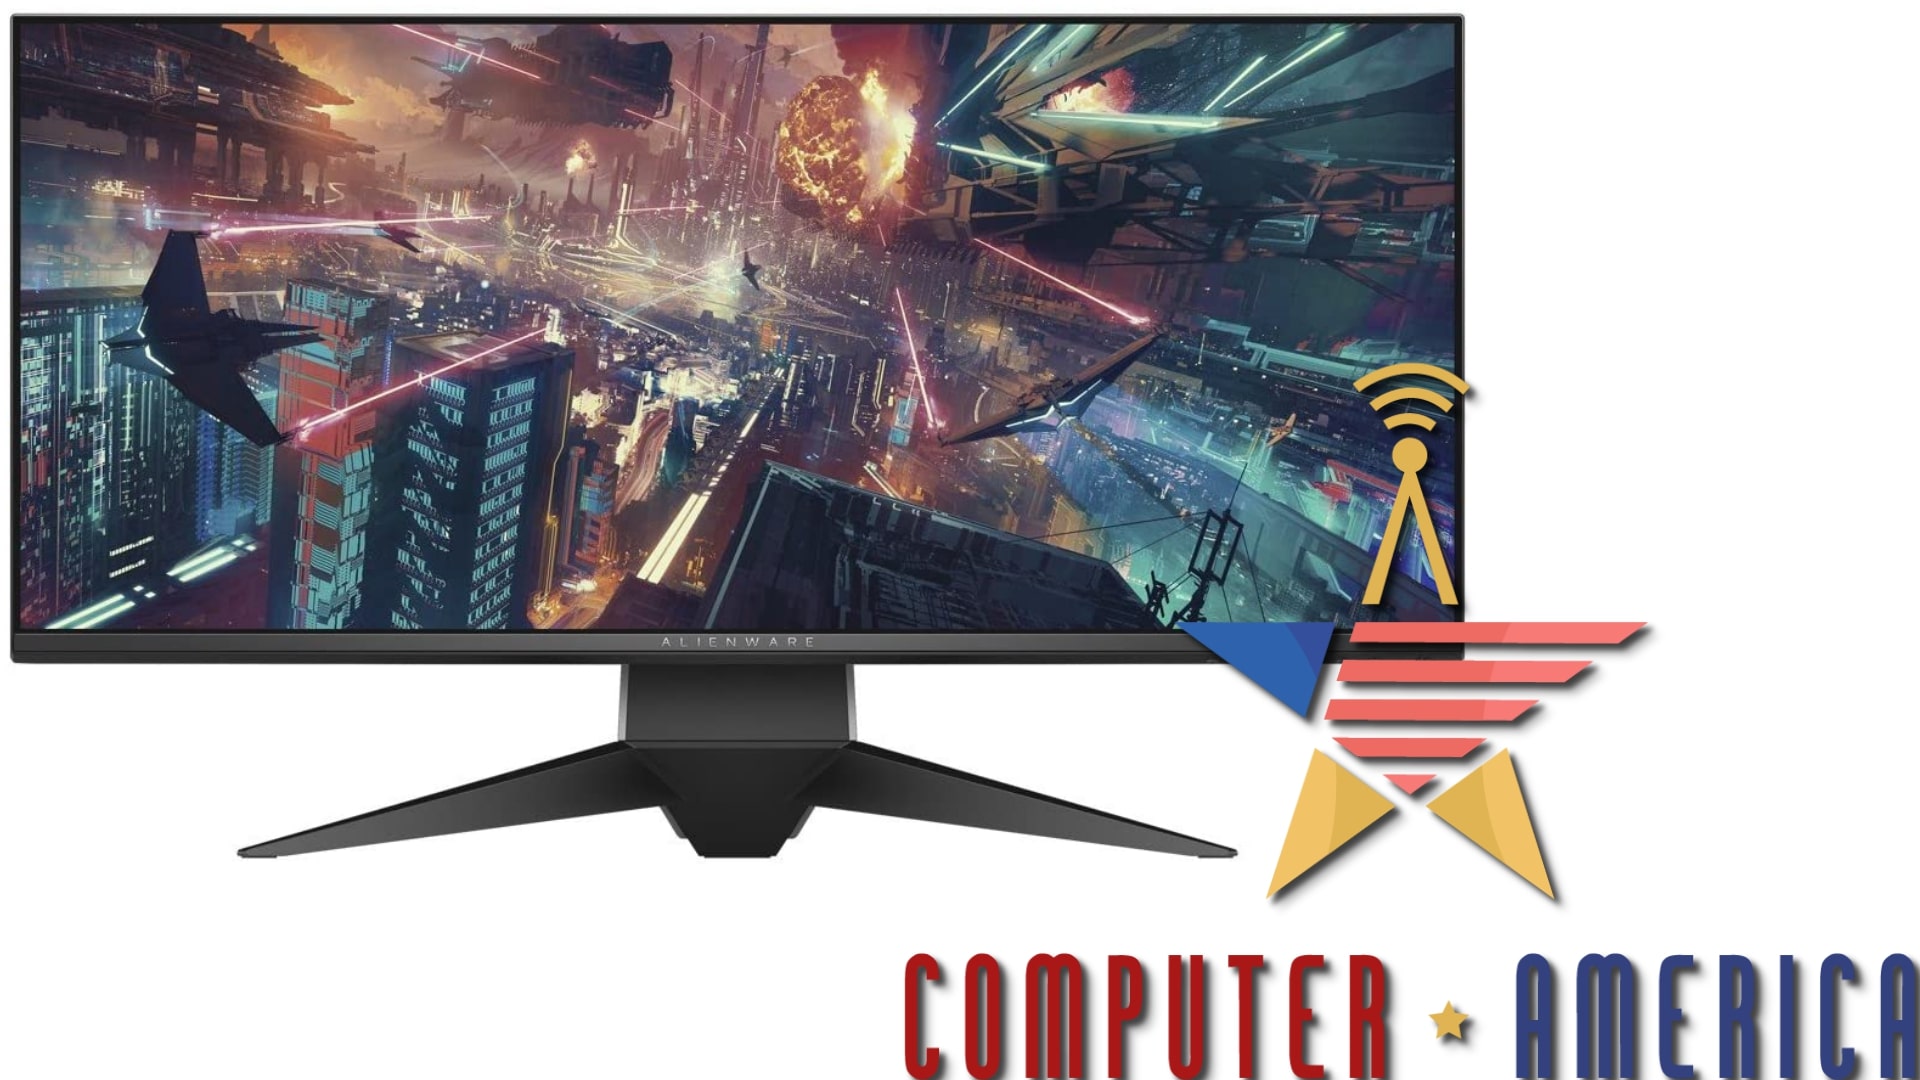 Alienware AW3418DW 1900R 34.1" Review